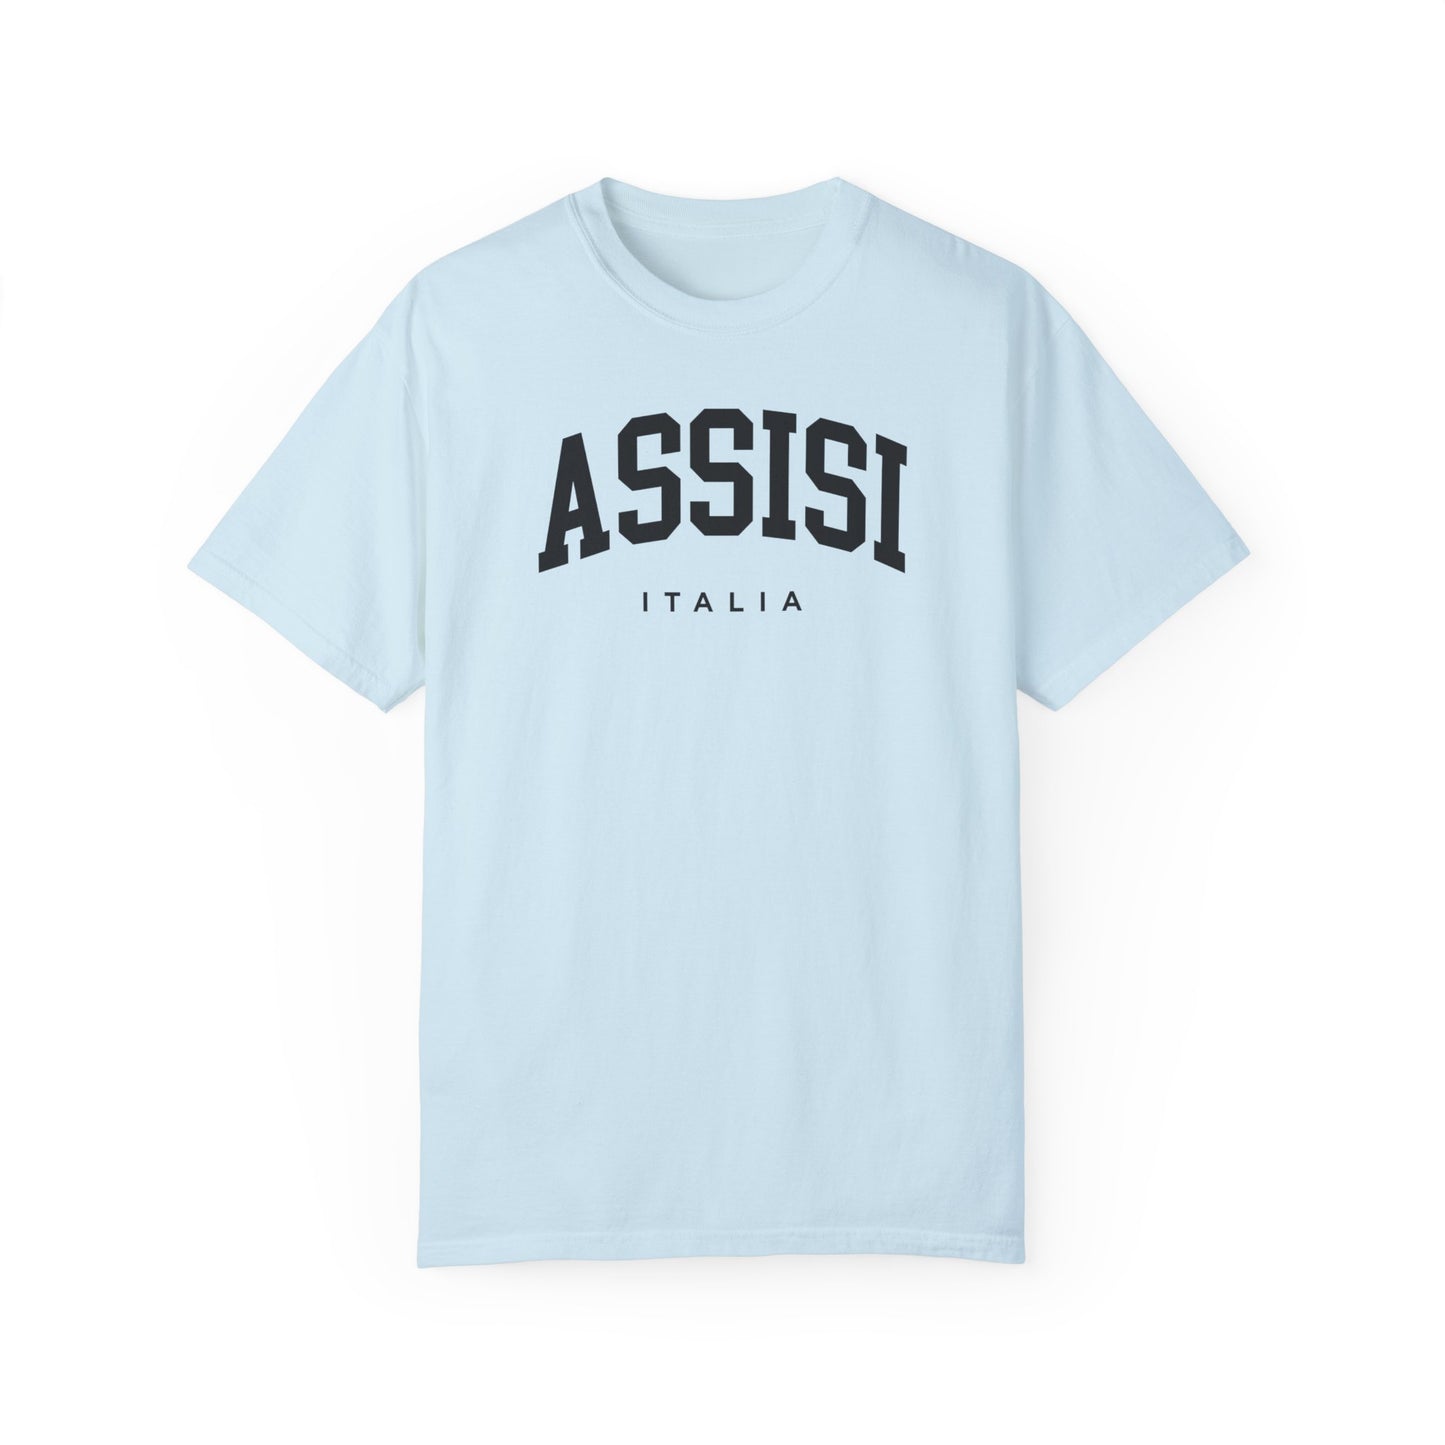 Assisi Italy Comfort Colors® Tee